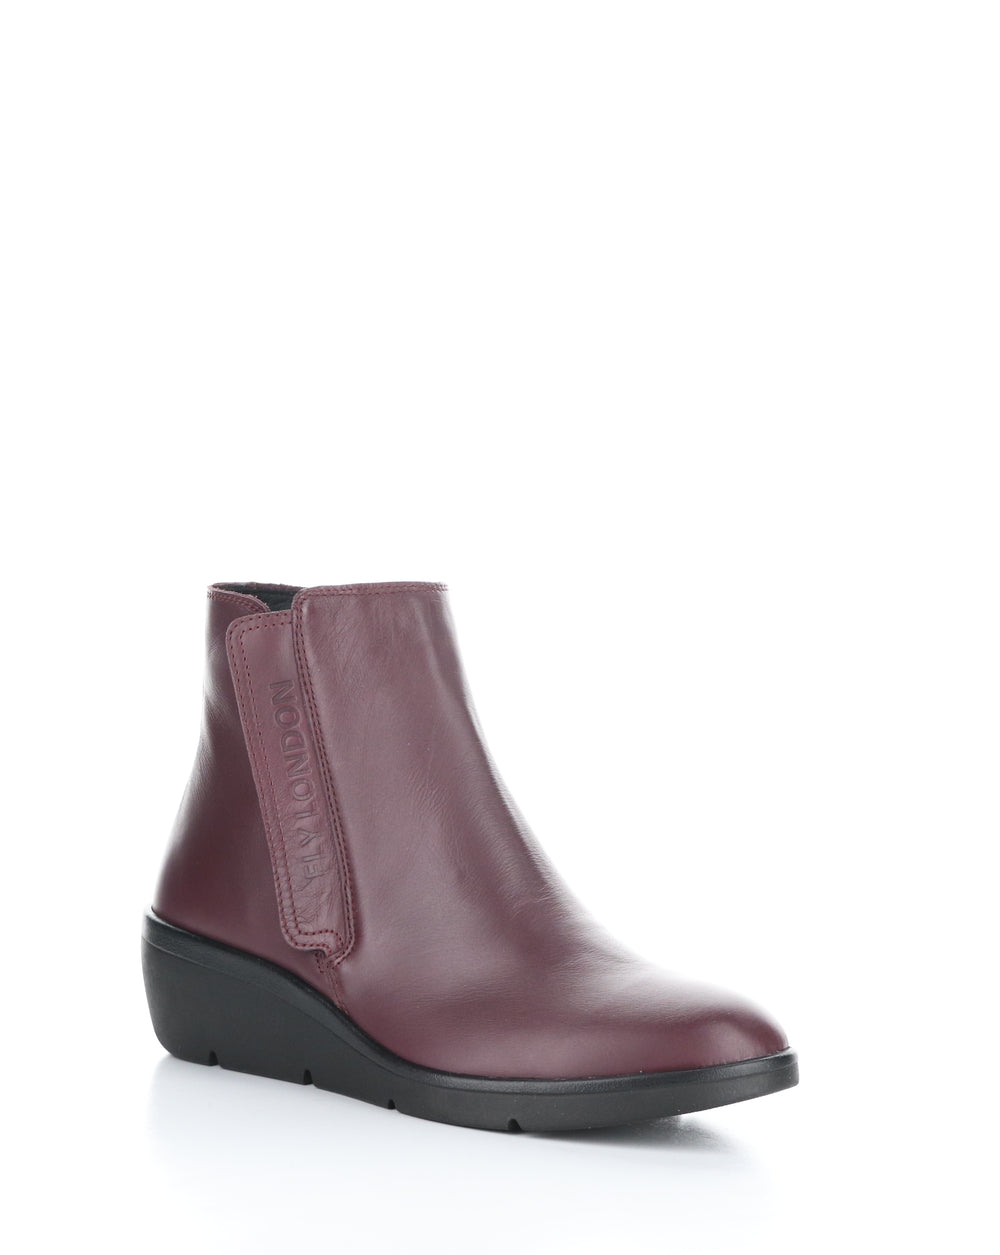 NULA550FLY 005 BORDEAUX Round Toe Boots